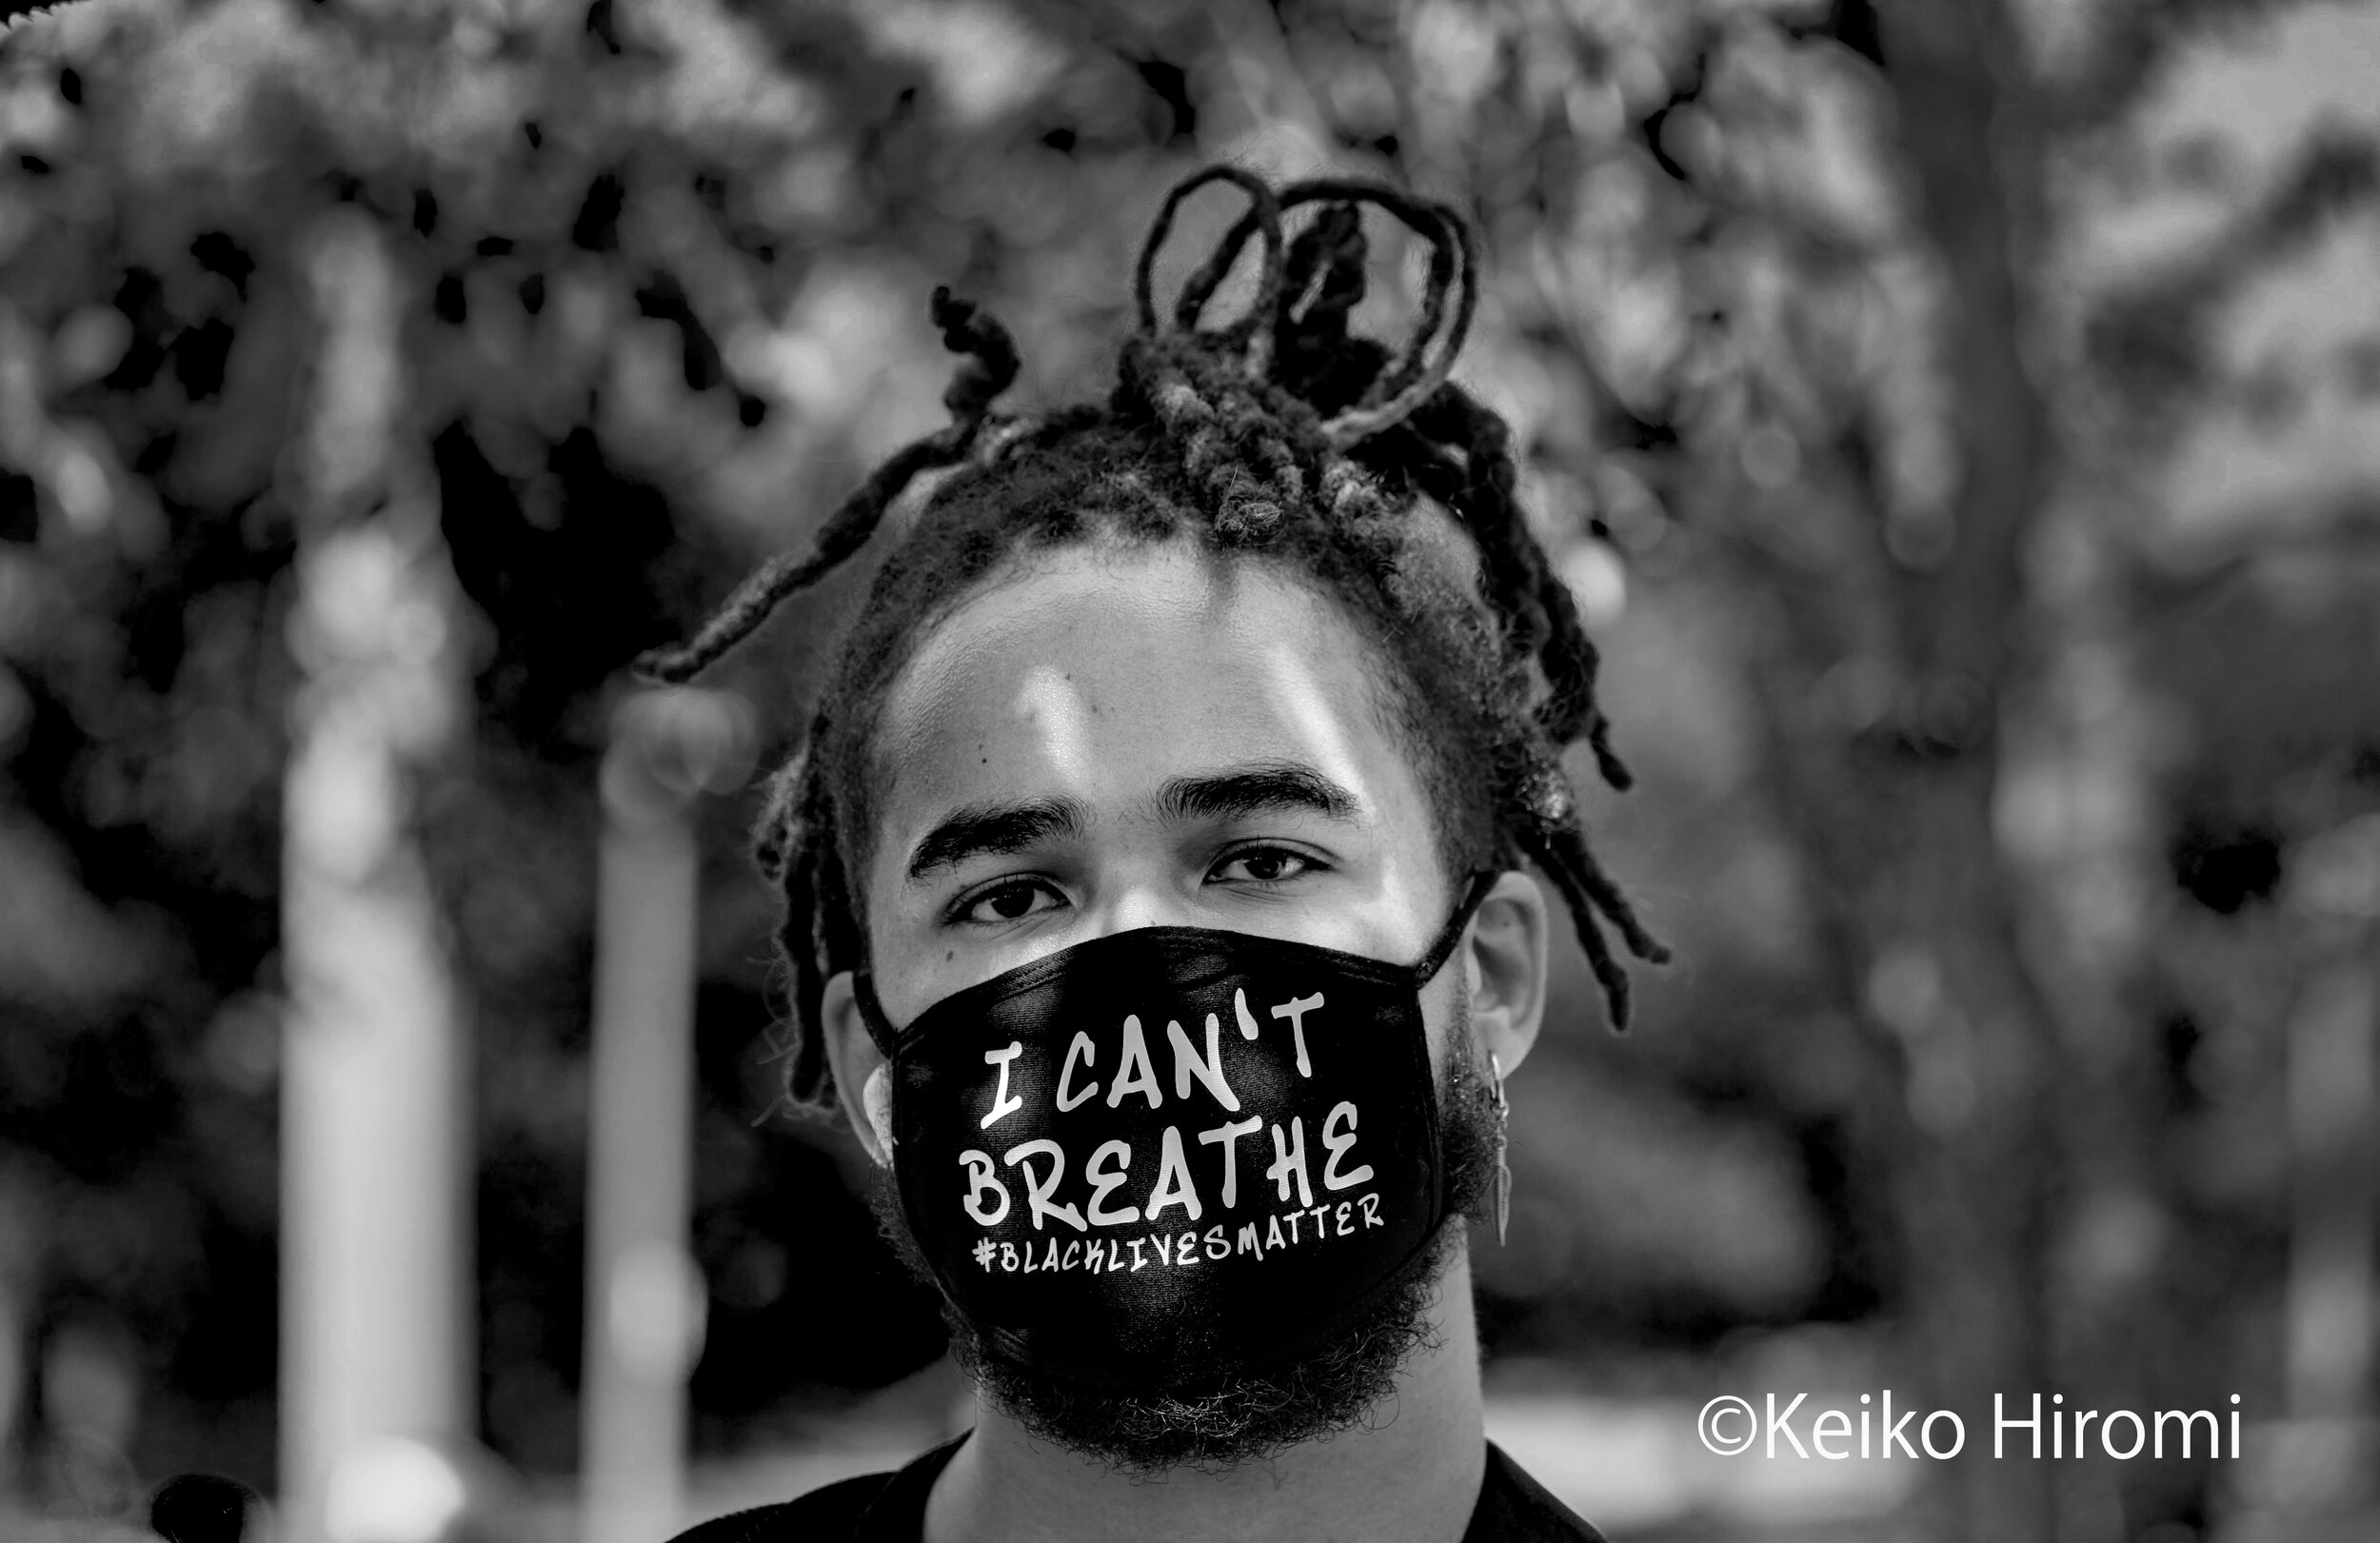  June 22, 2020, Boston, Massachusetts, USA: A protester wears a face mask " I can't breathe" during a Black Lives Matter rally in a response to a death of Rayshard Brooks and against police brutality and racism in Boston.  